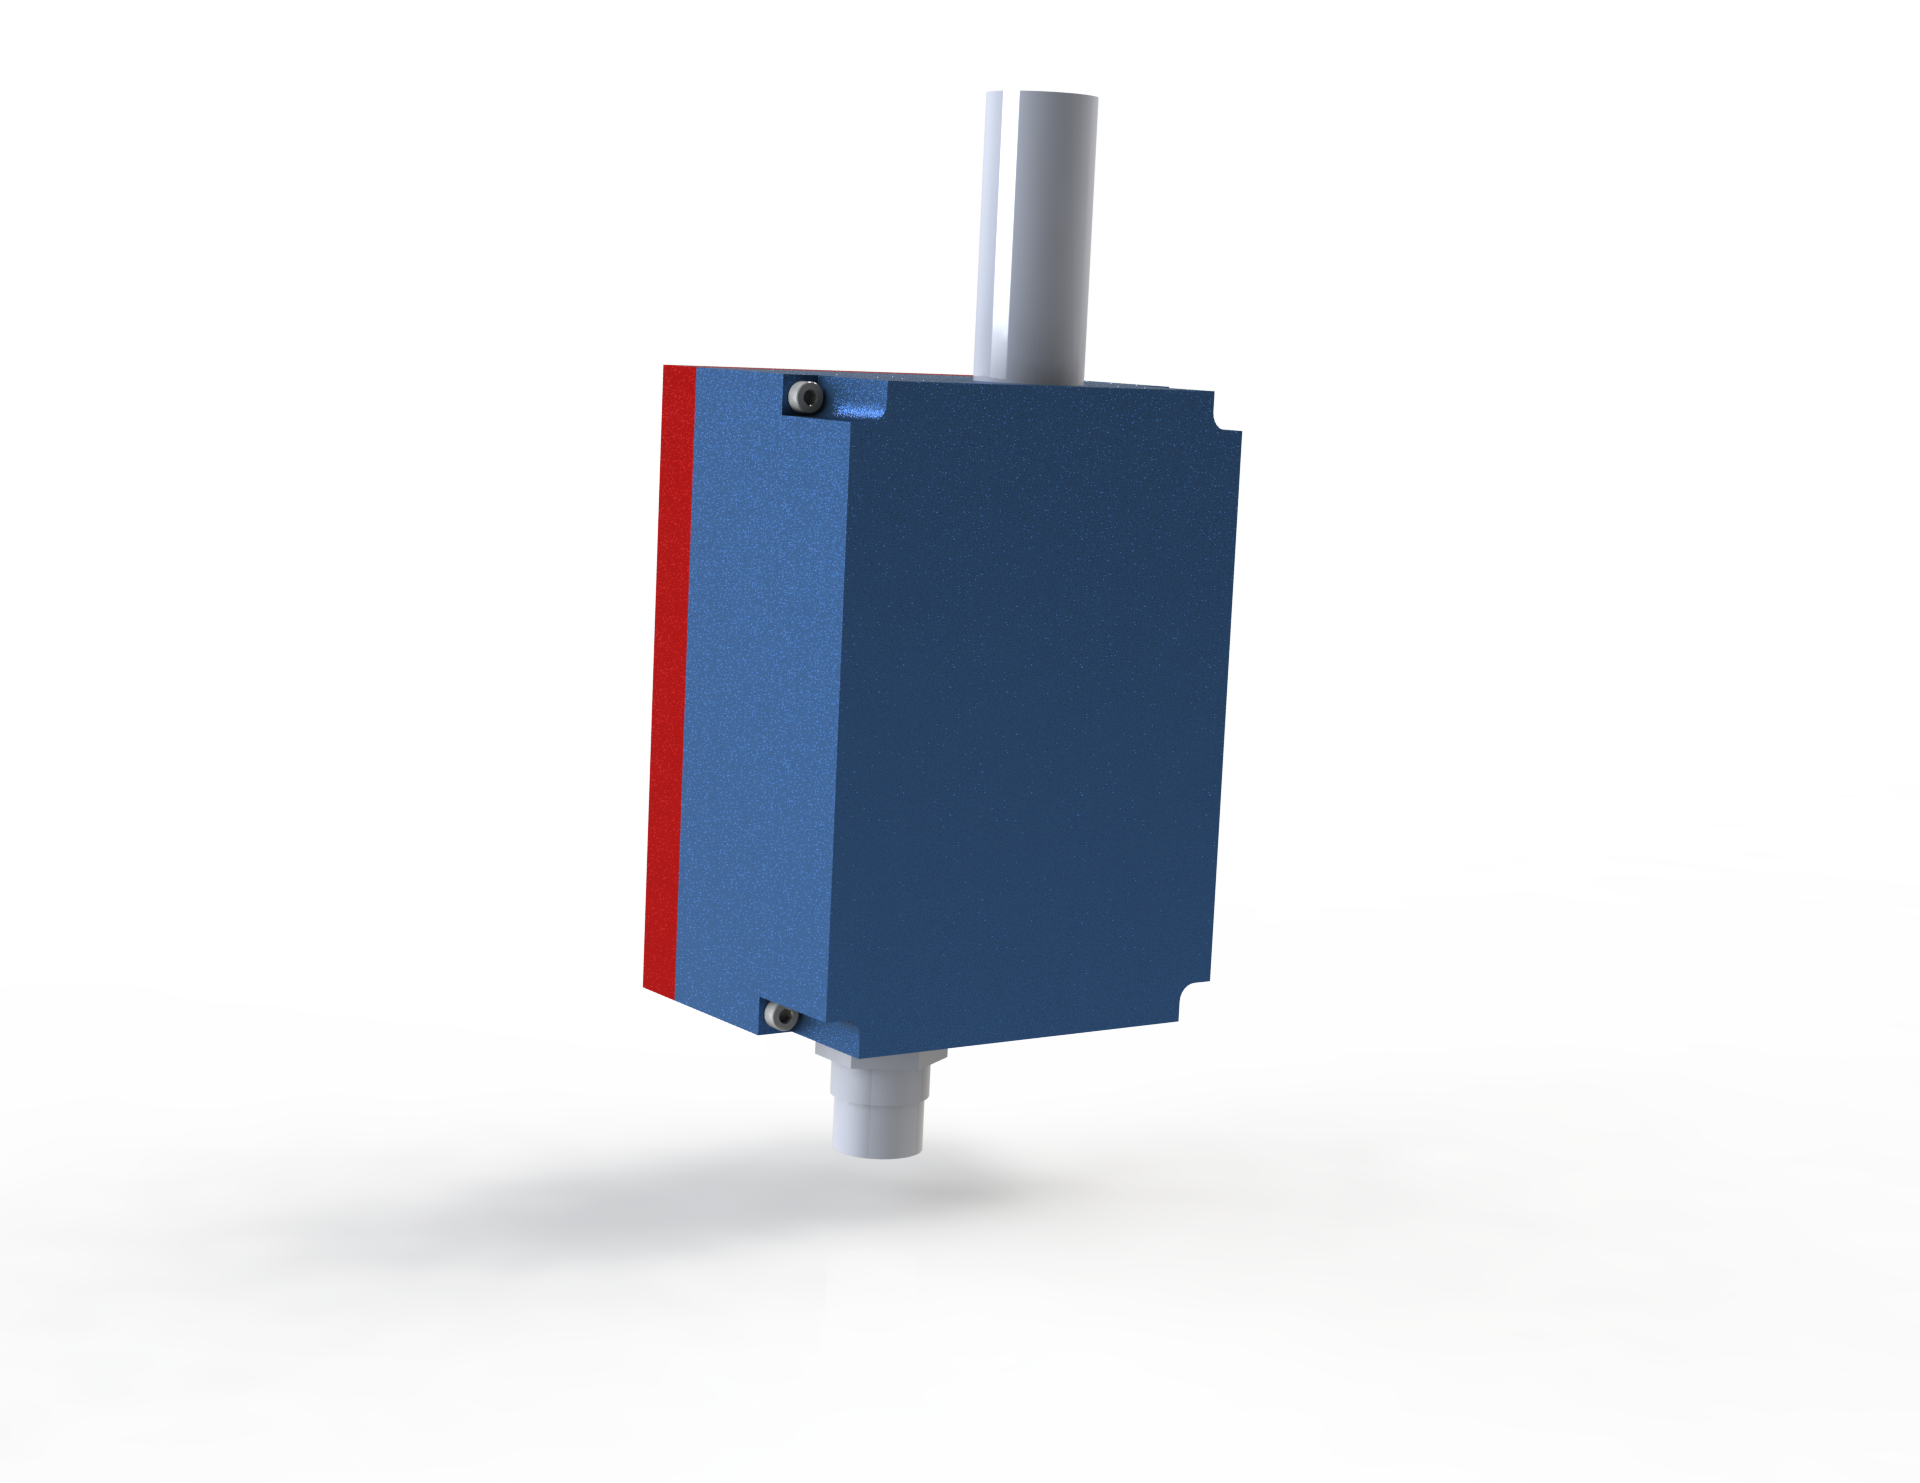 Render of the casing